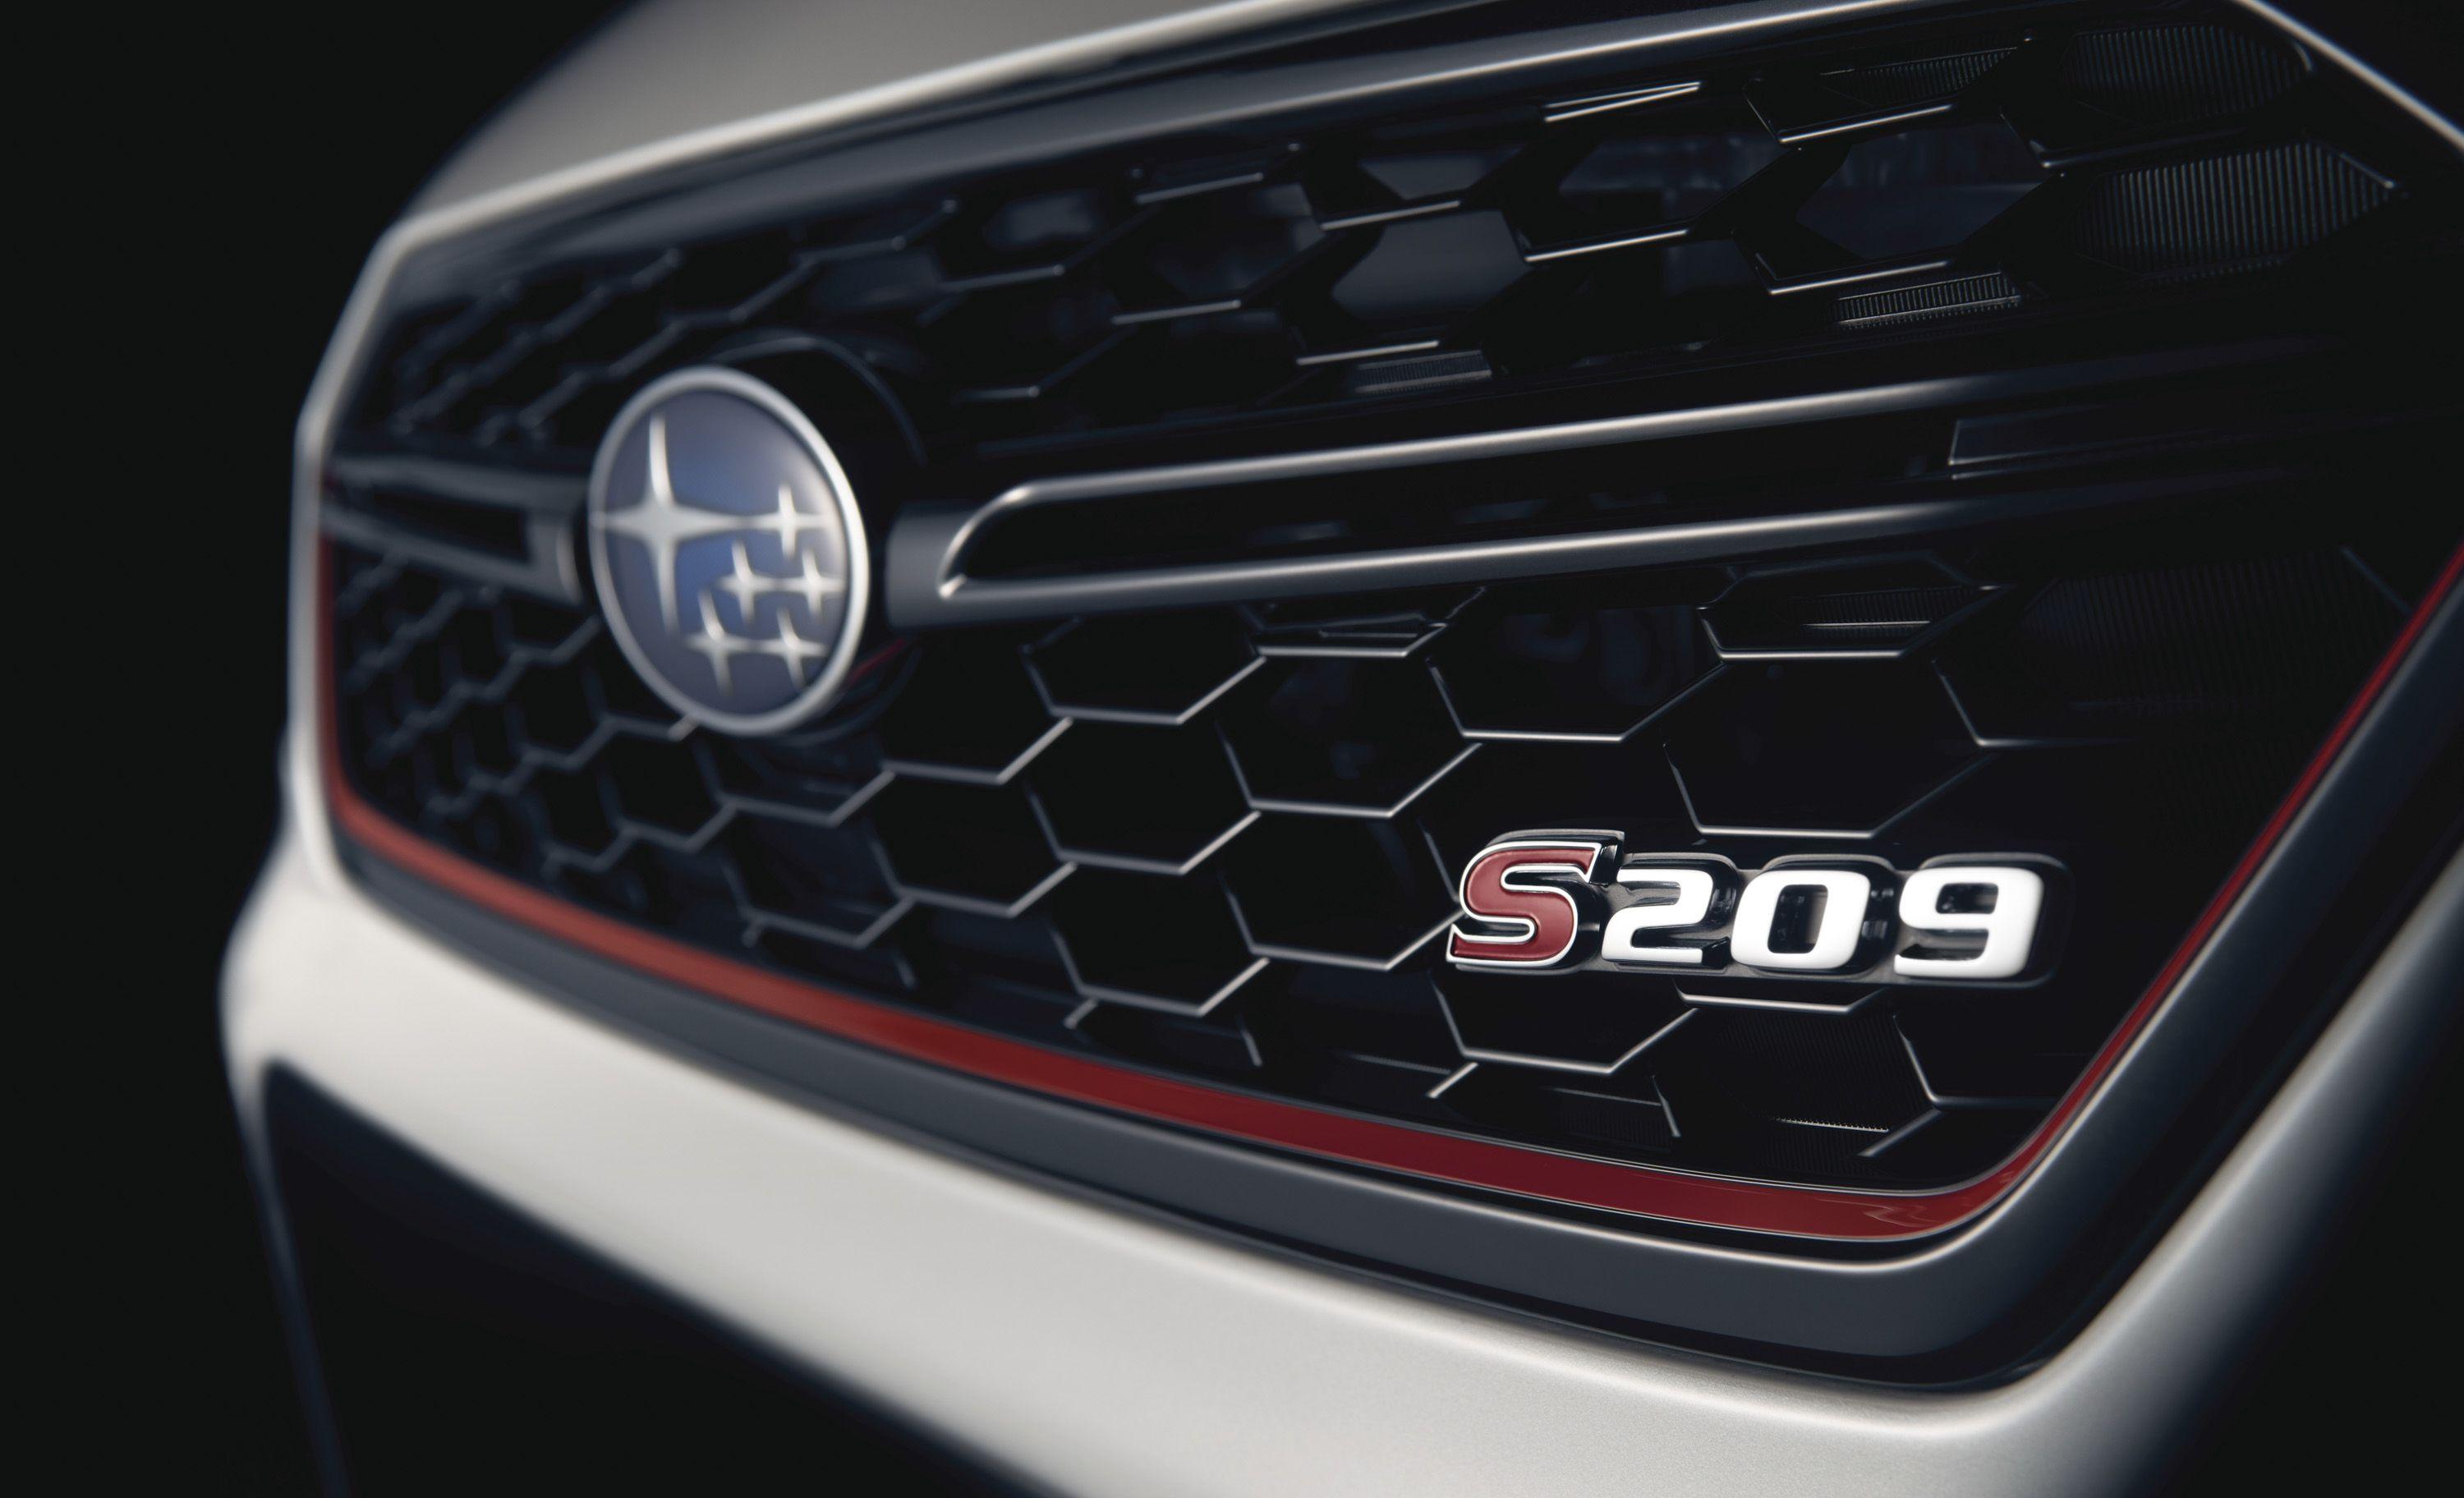 New Subaru WRX Logo - Here's Your First Look At The 2019 Subaru WRX STI S209 That Will ...